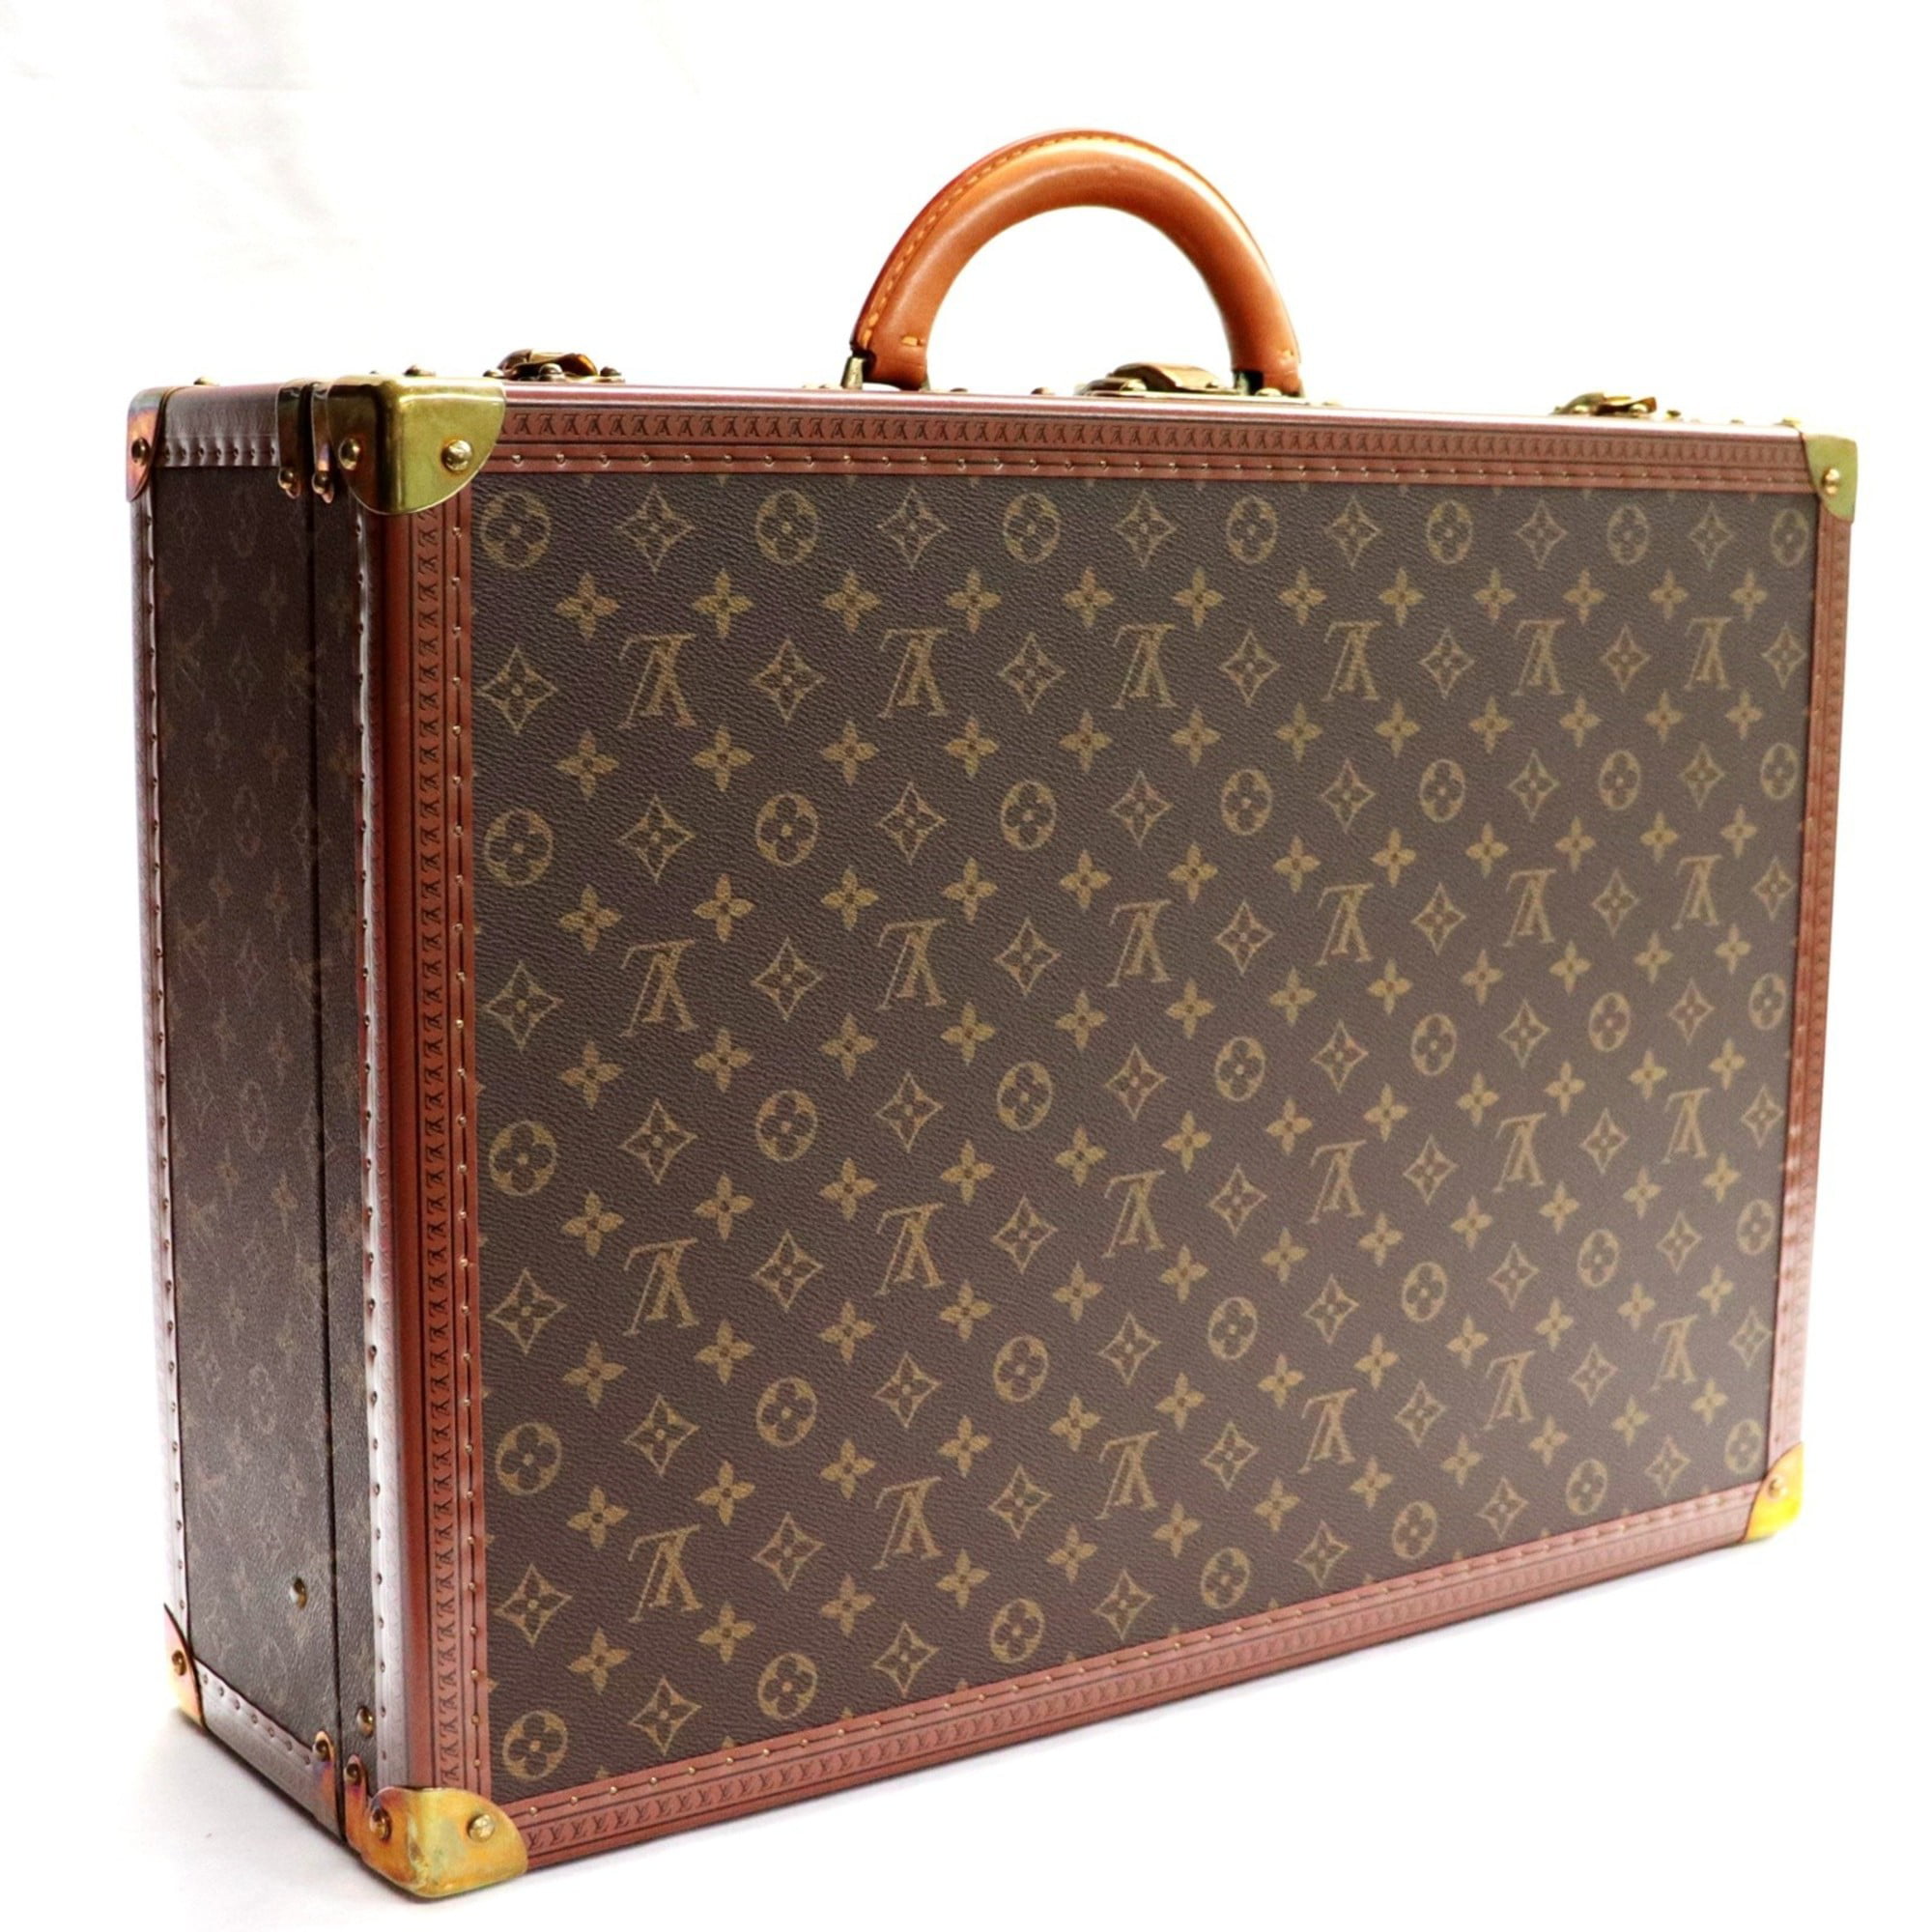 Louis Vuitton Canvas TSA Approved Travel Luggage for sale